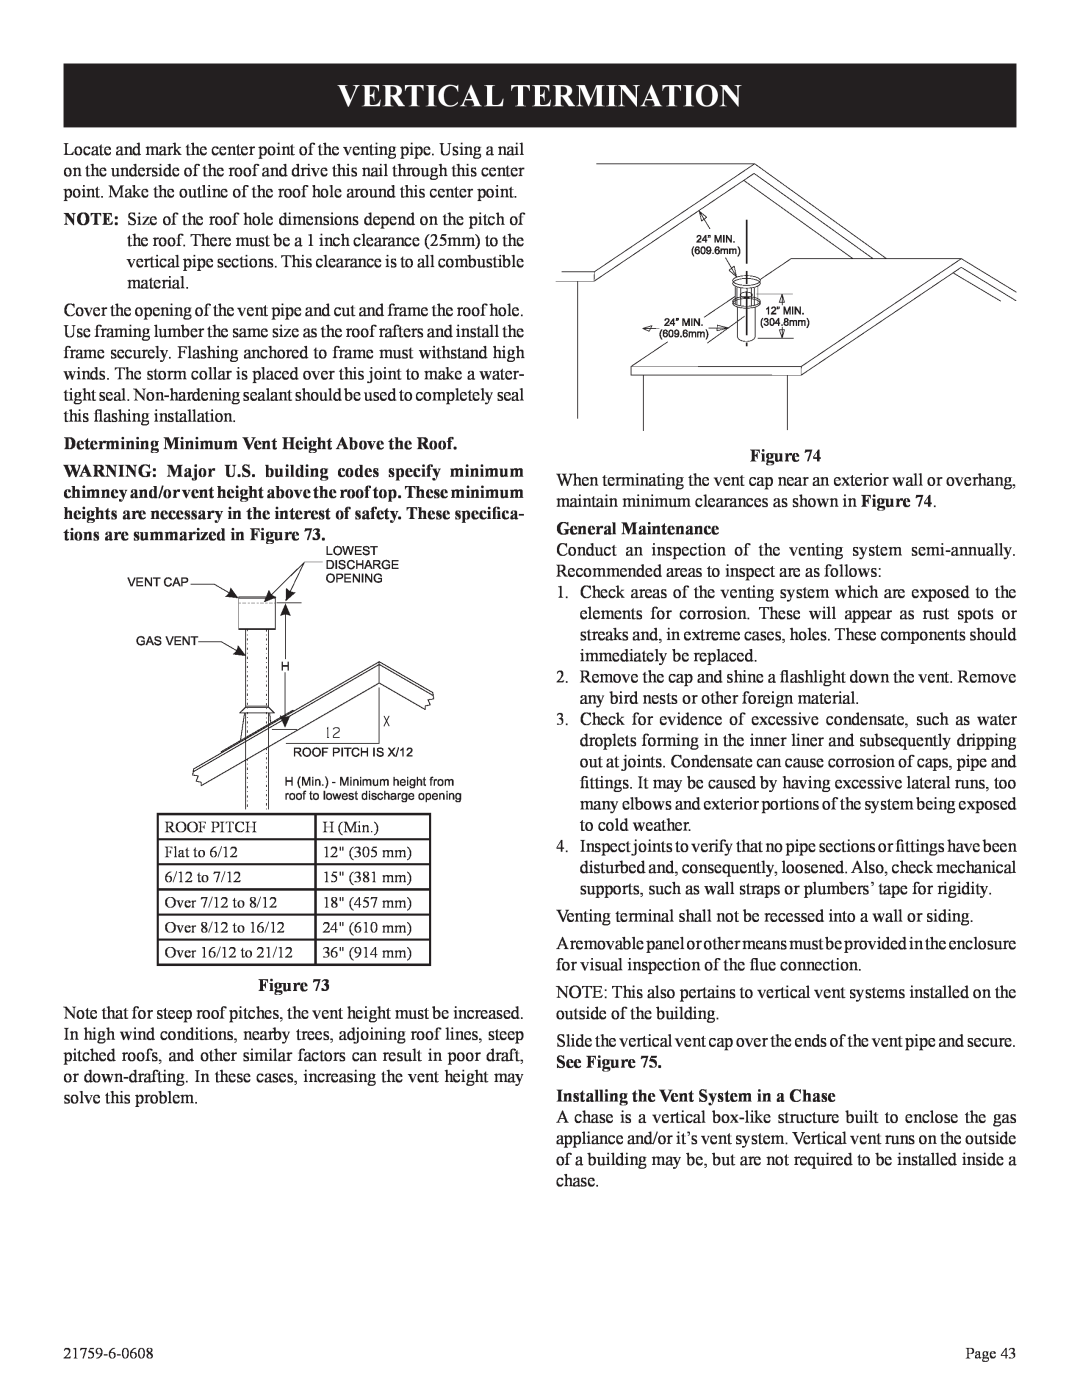 Empire Comfort Systems DVP42FP, P)-2 Vertical Termination, Determining Minimum Vent Height Above the Roof, Figure 